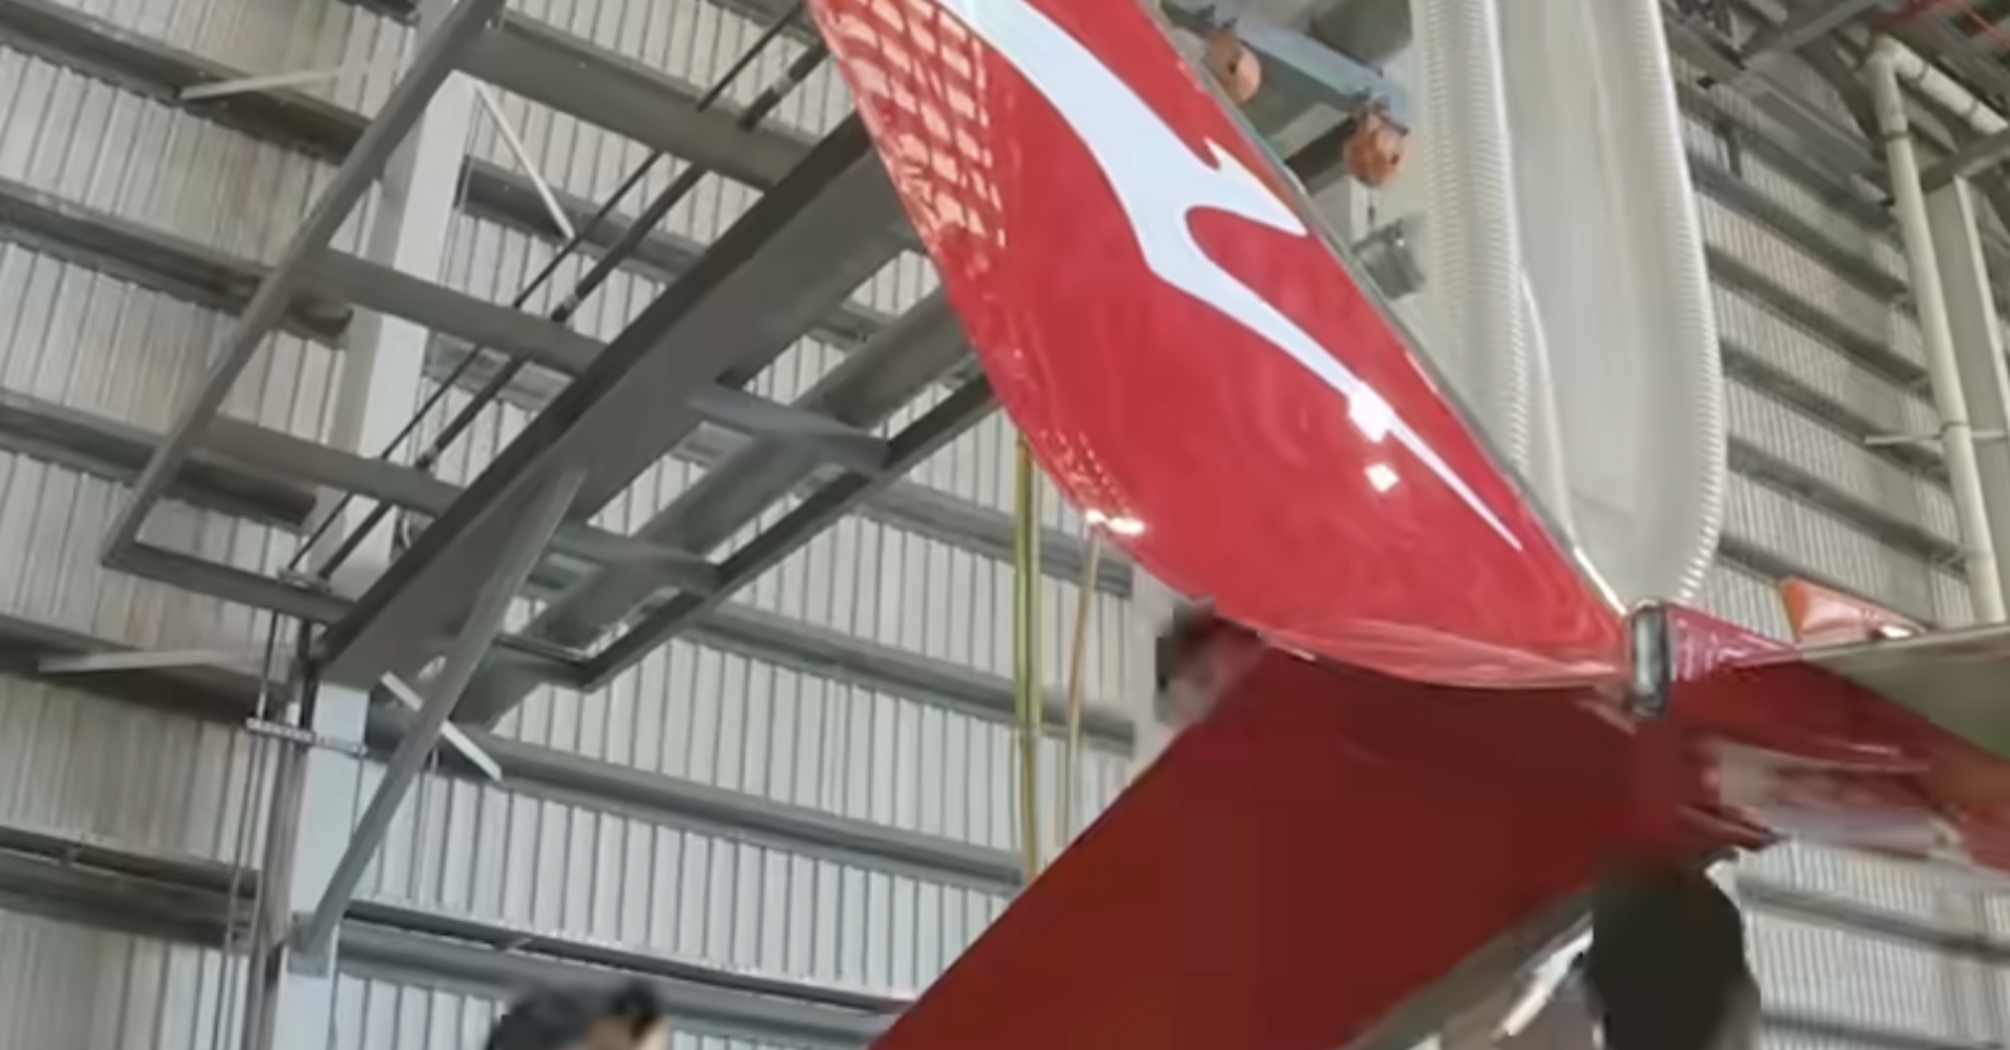 A new development in aircraft construction: Qantas is upgrading part of its fleet with new wings